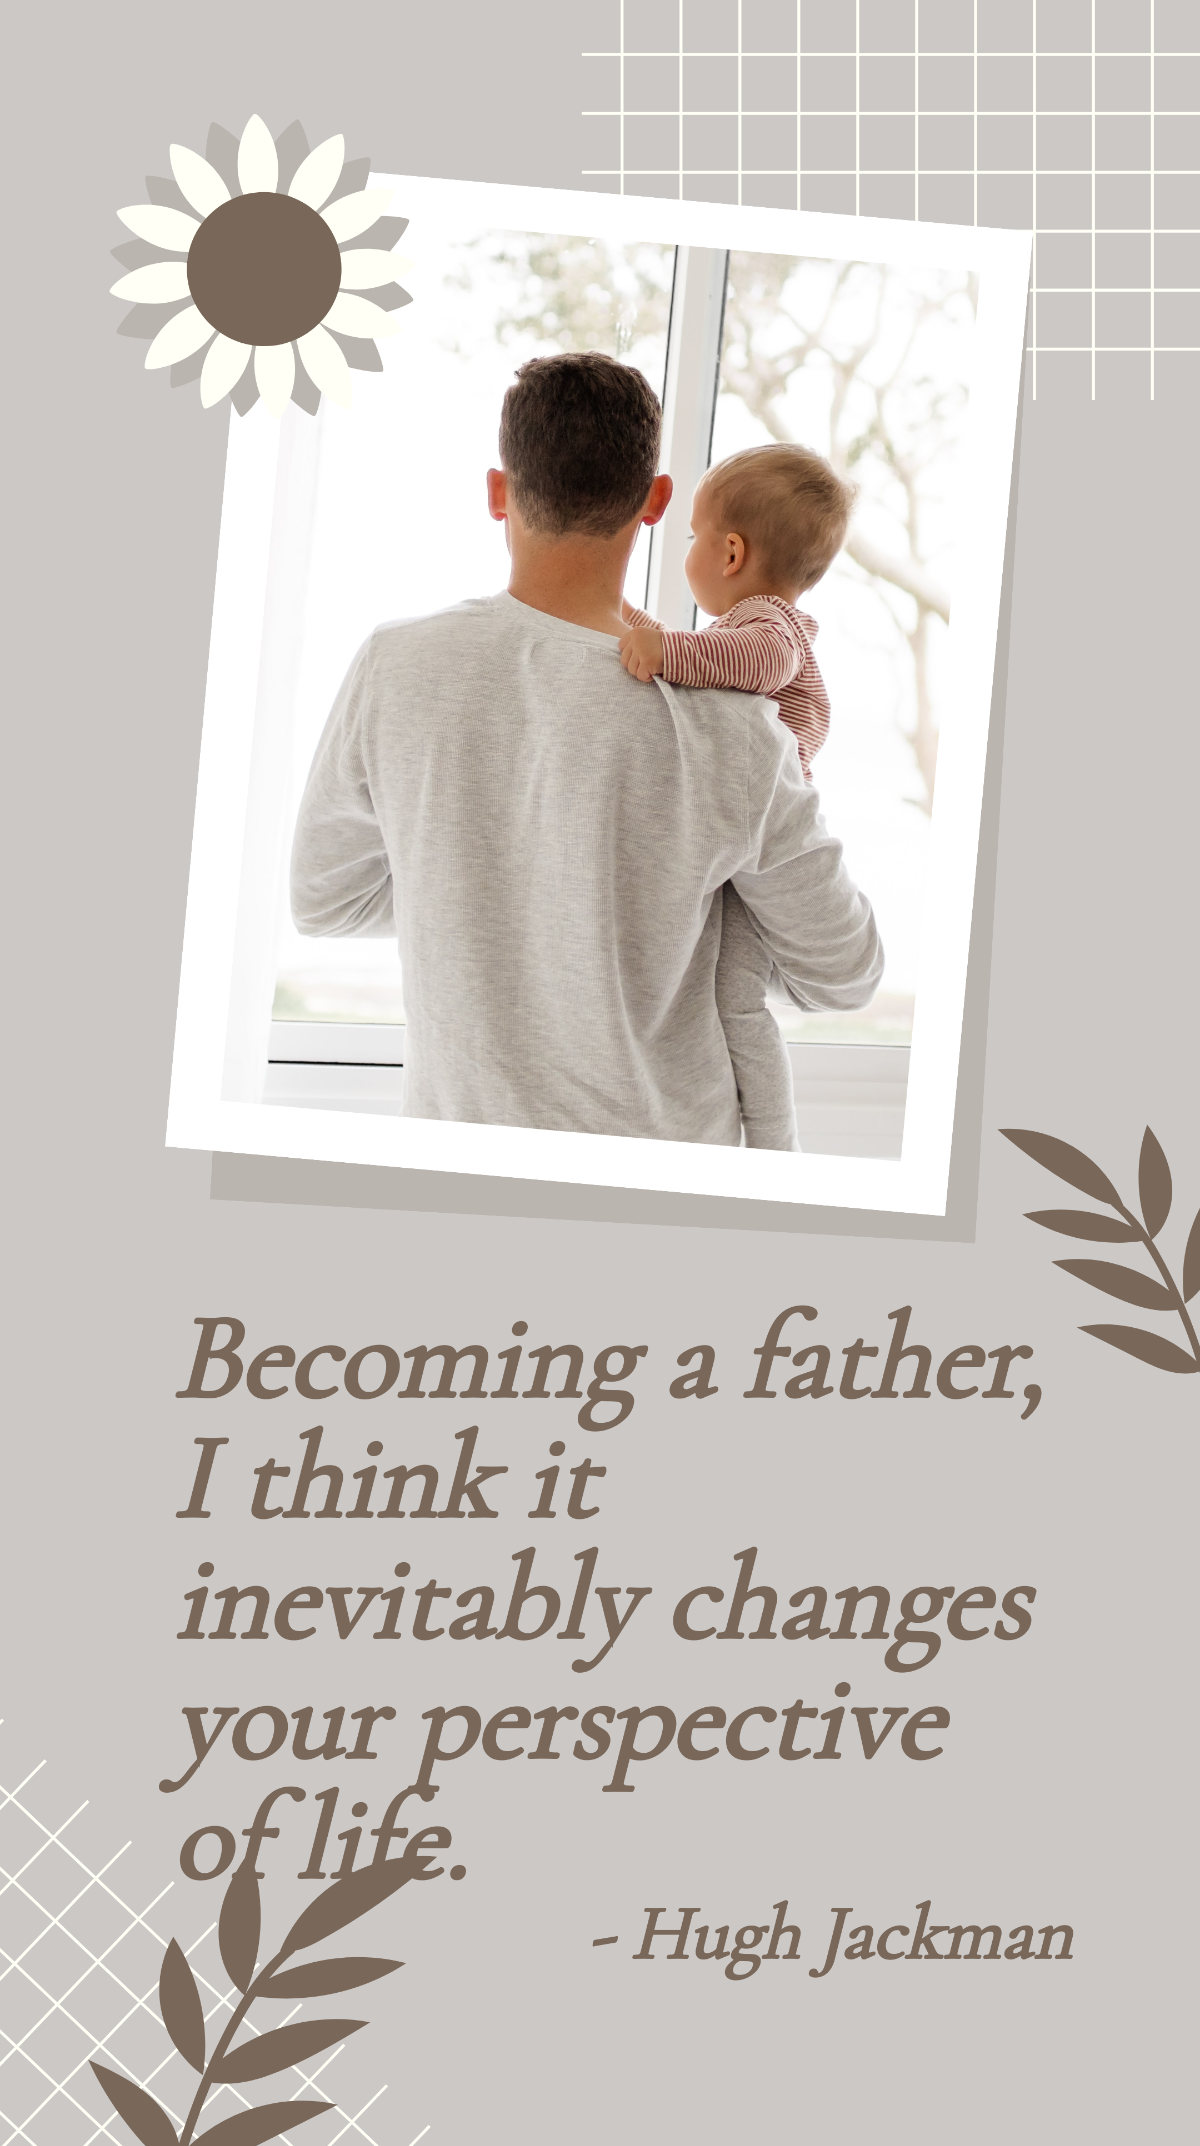 Hugh Jackman - Becoming a father, I think it inevitably changes your perspective of life. Template